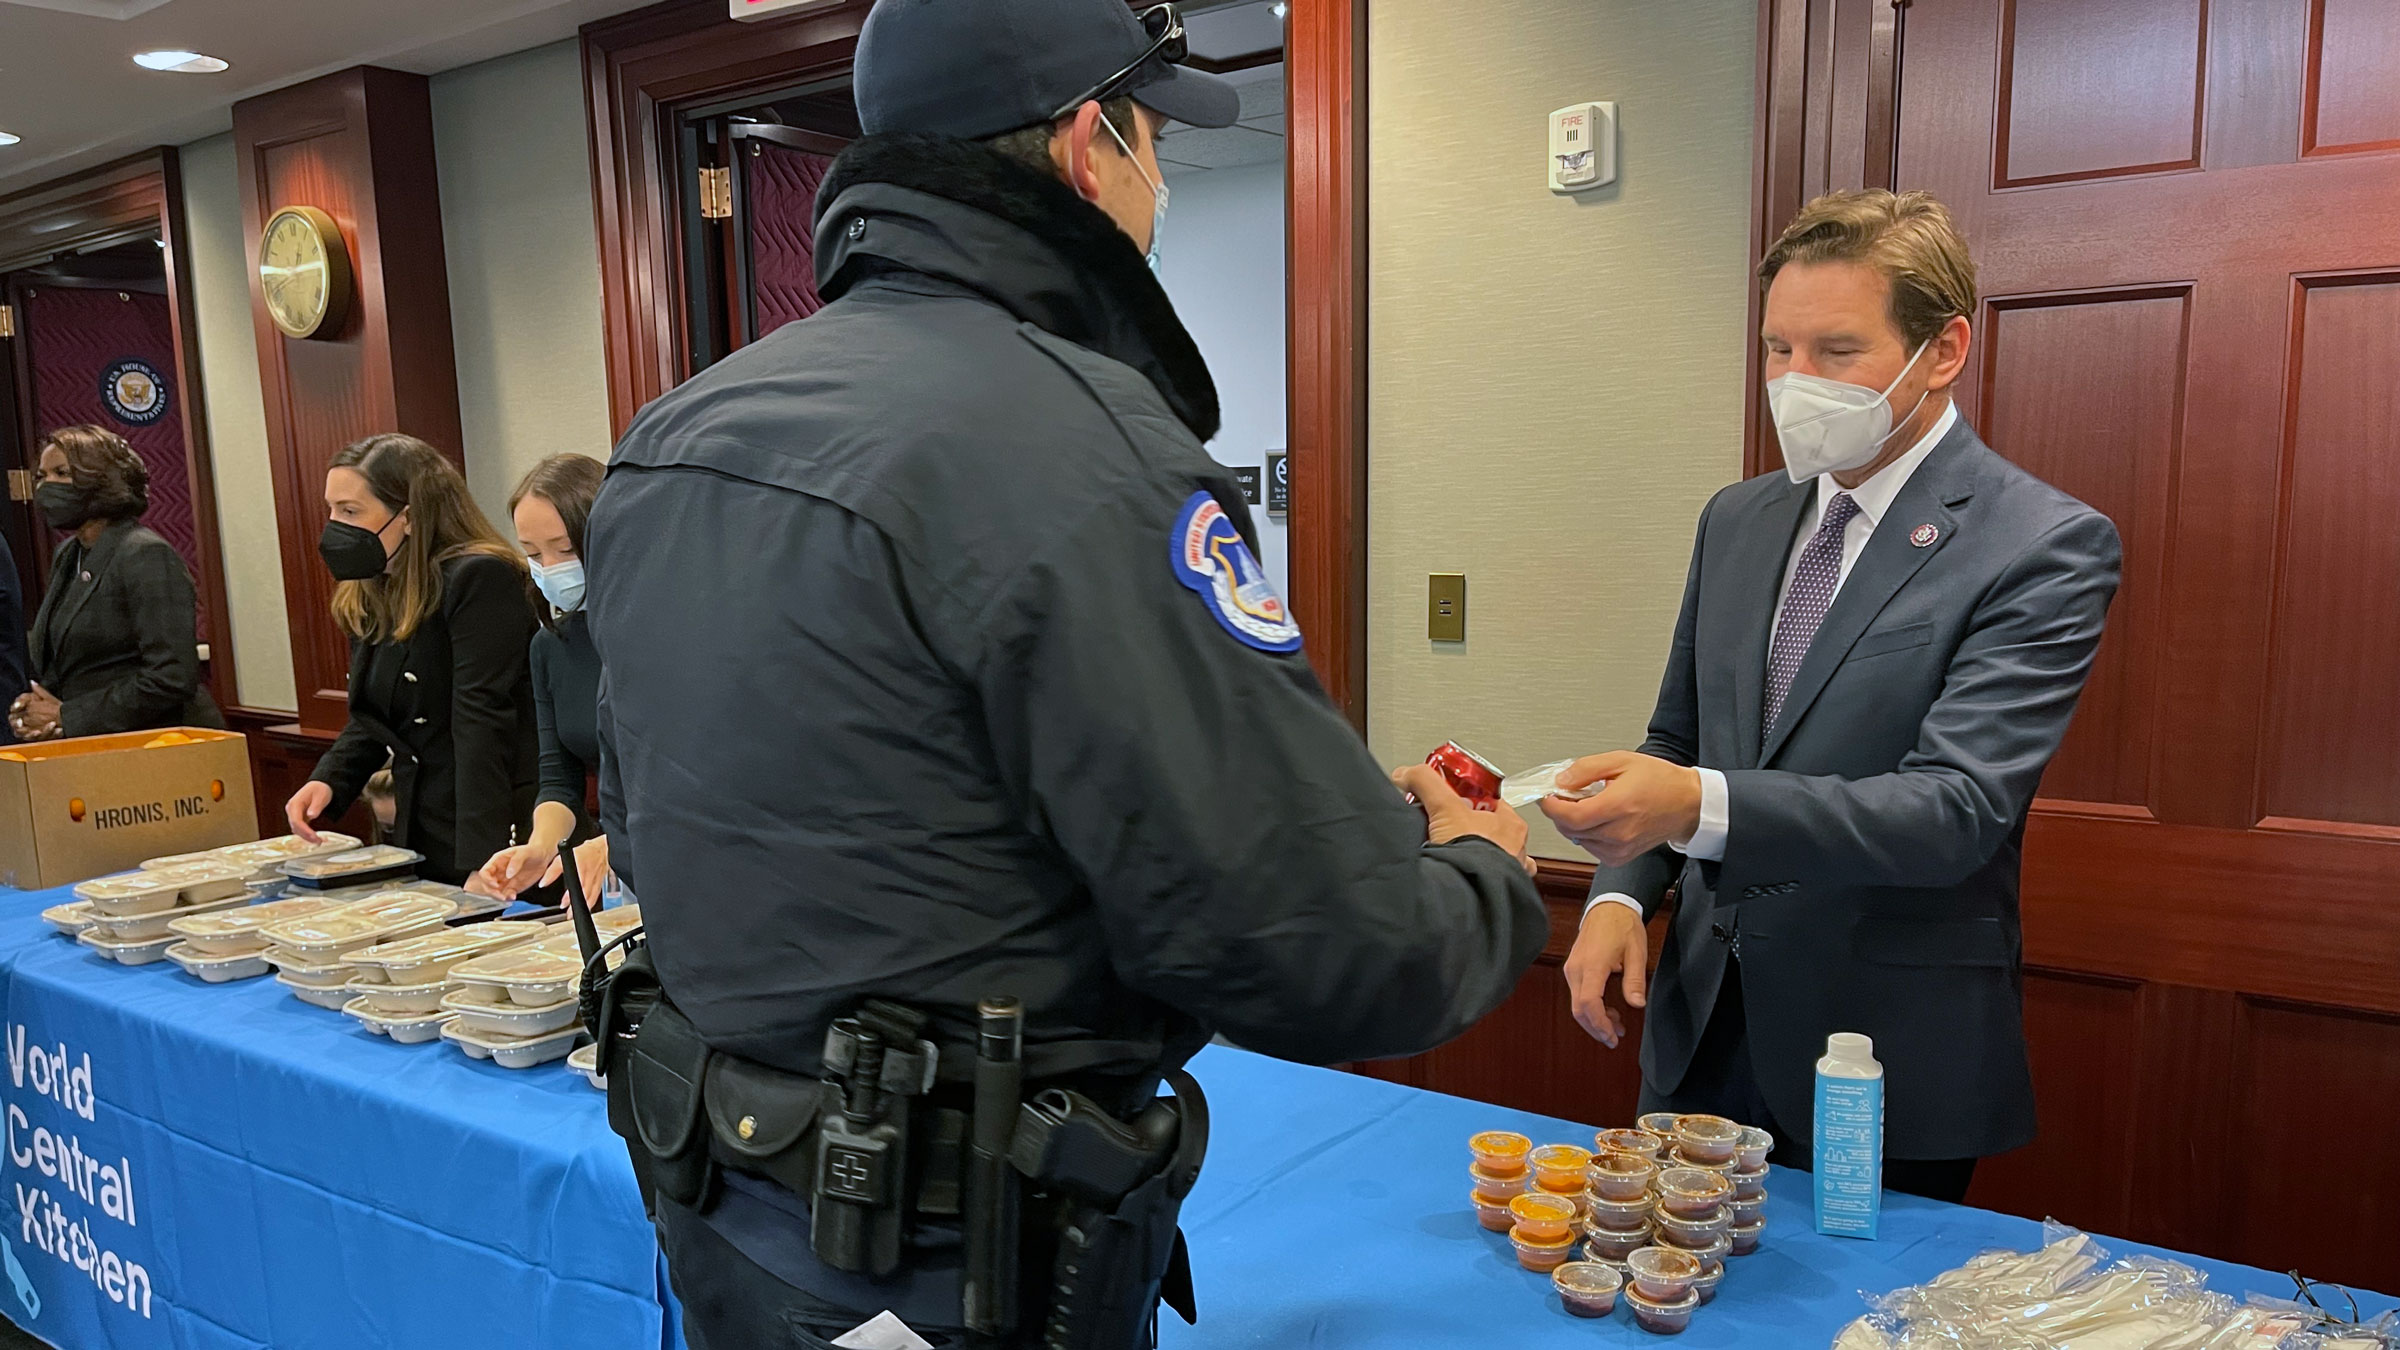 US Rep. Dean Phillips helps distribute lunch to Capitol workers on Thursday.